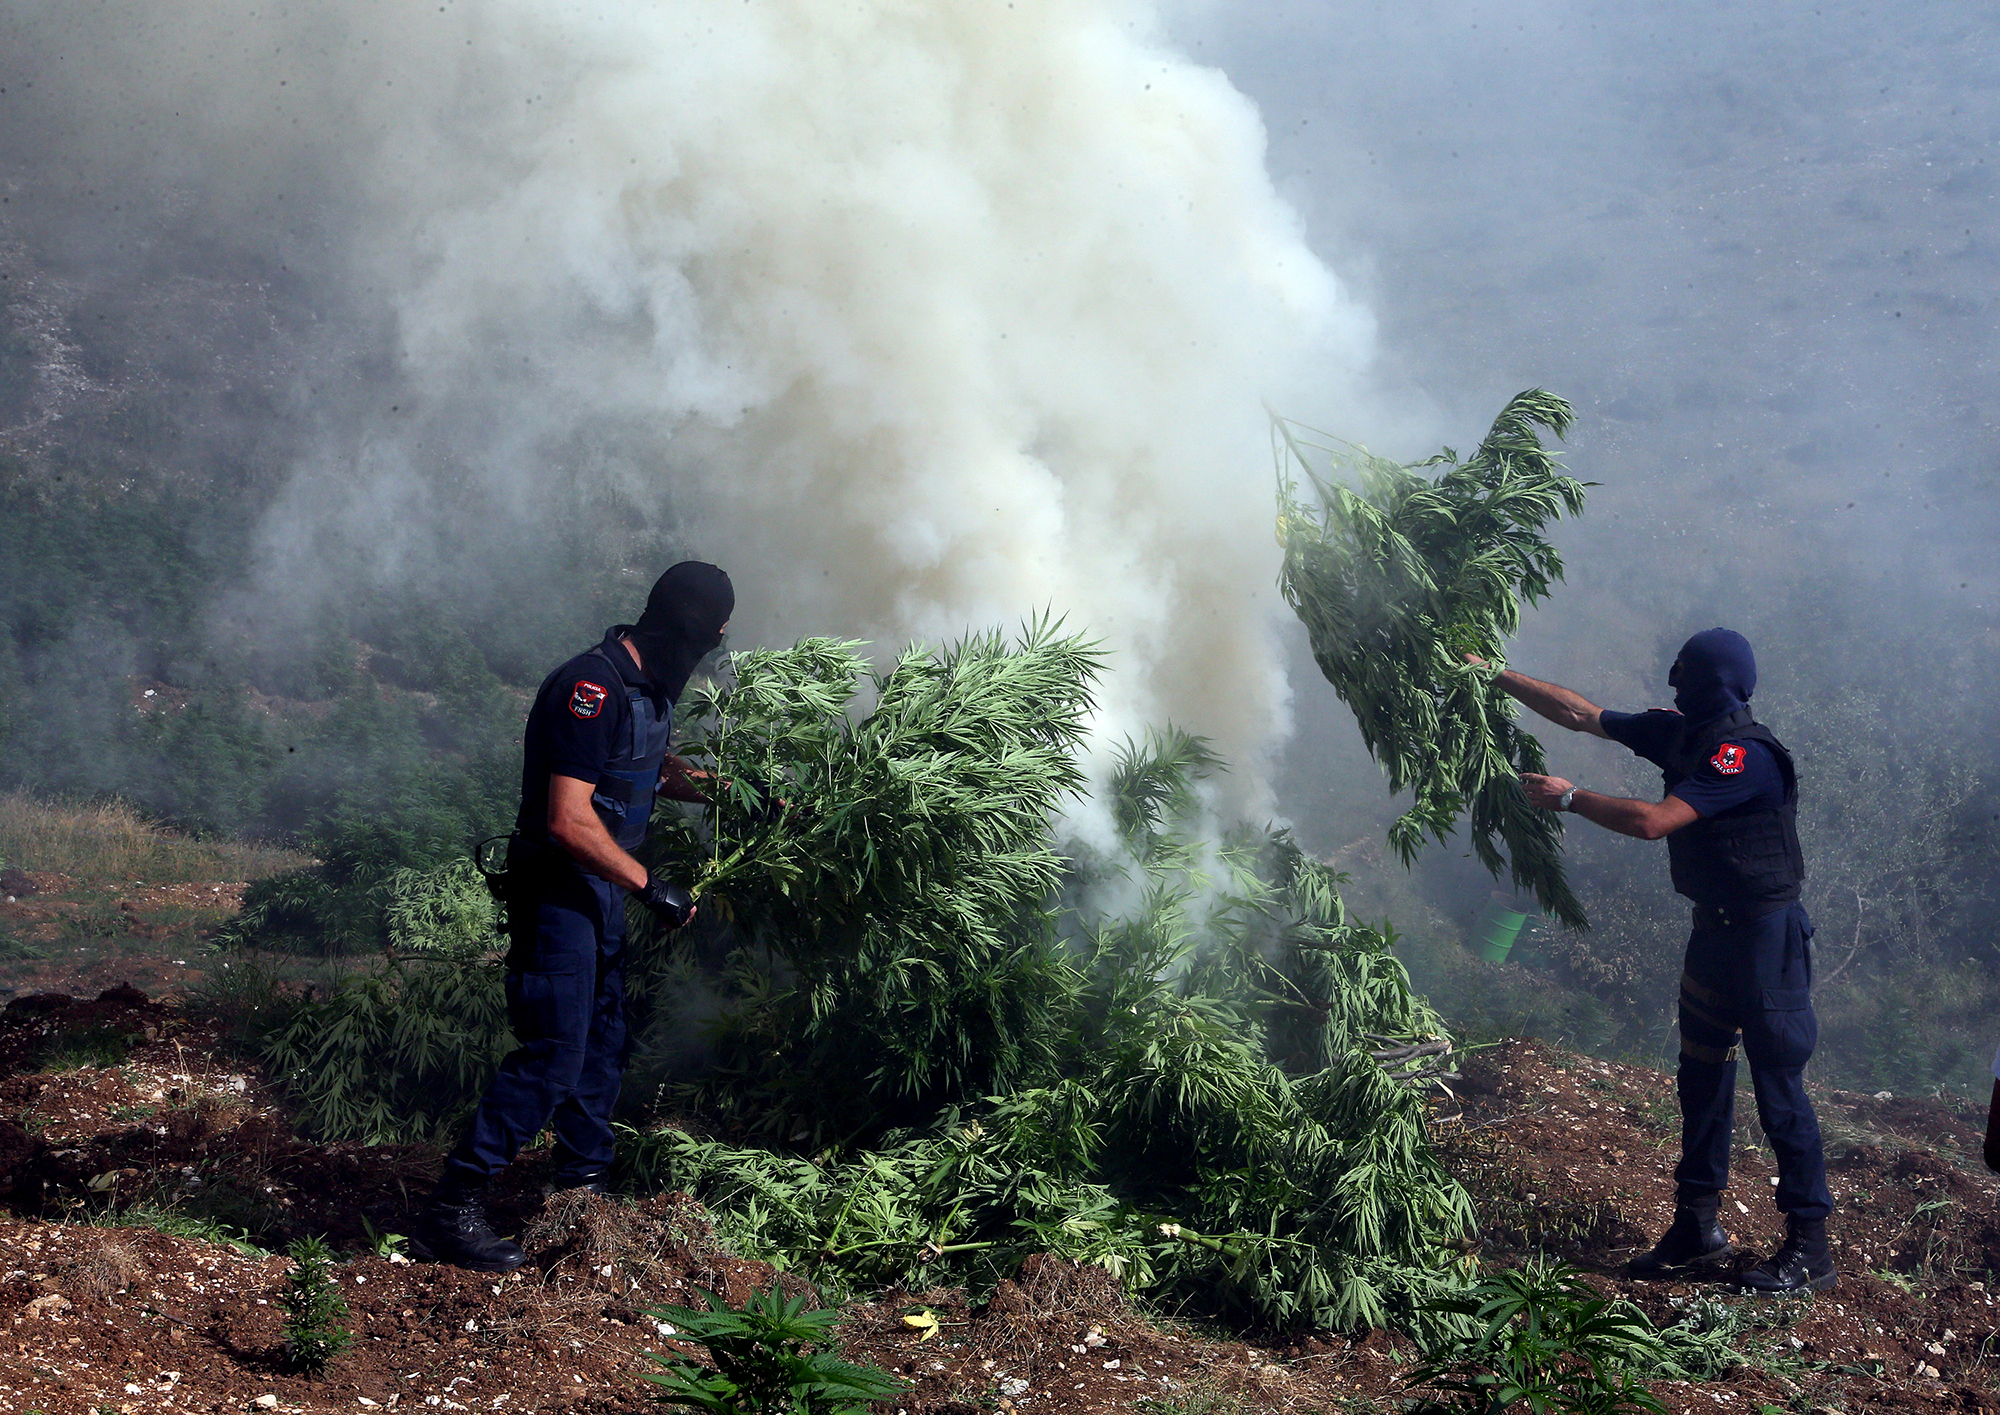 In this photo taken on Thursday Aug. 25, 2015, masked police officers burn cannabis plants in Kurvelesh commune, 200 kilometers (125 miles) south of the Albanian capital, Tirana. Albanian police found and destroyed some 16,000 cannabis plants and arrested a suspect. So far half a million cannabis plants have been destroyed since the government set fighting drug cultivation and trafficking as a top priority. (AP Photo/Hektor Pustina)